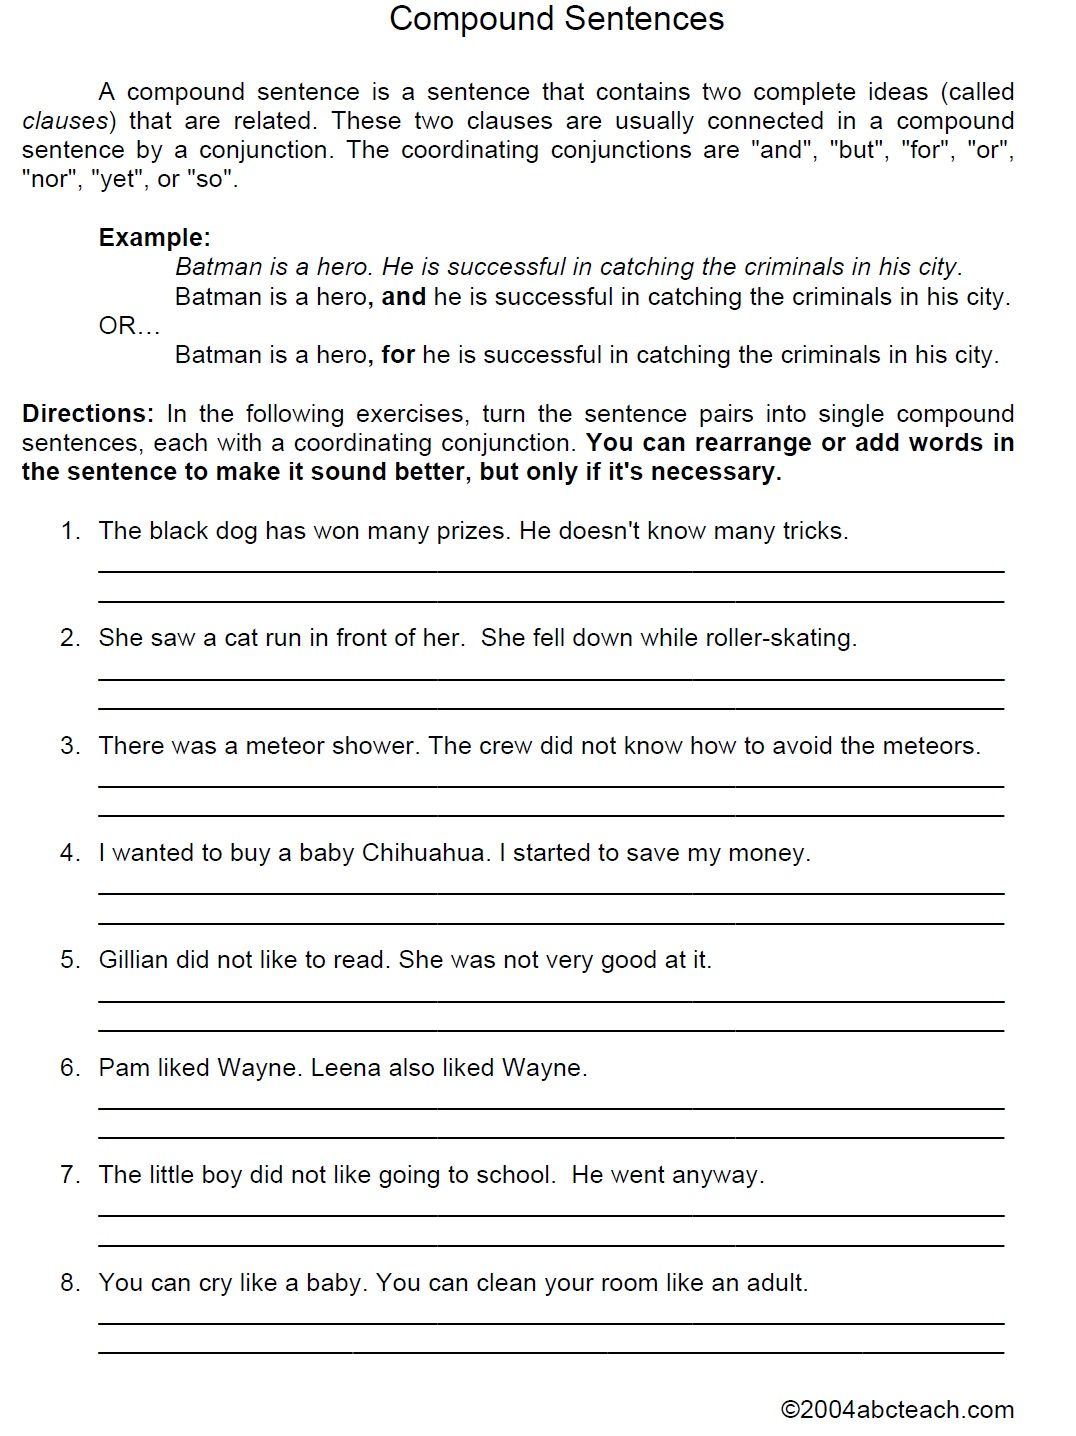 Writing Complex Sentences Worksheet Means For Each Pair Of